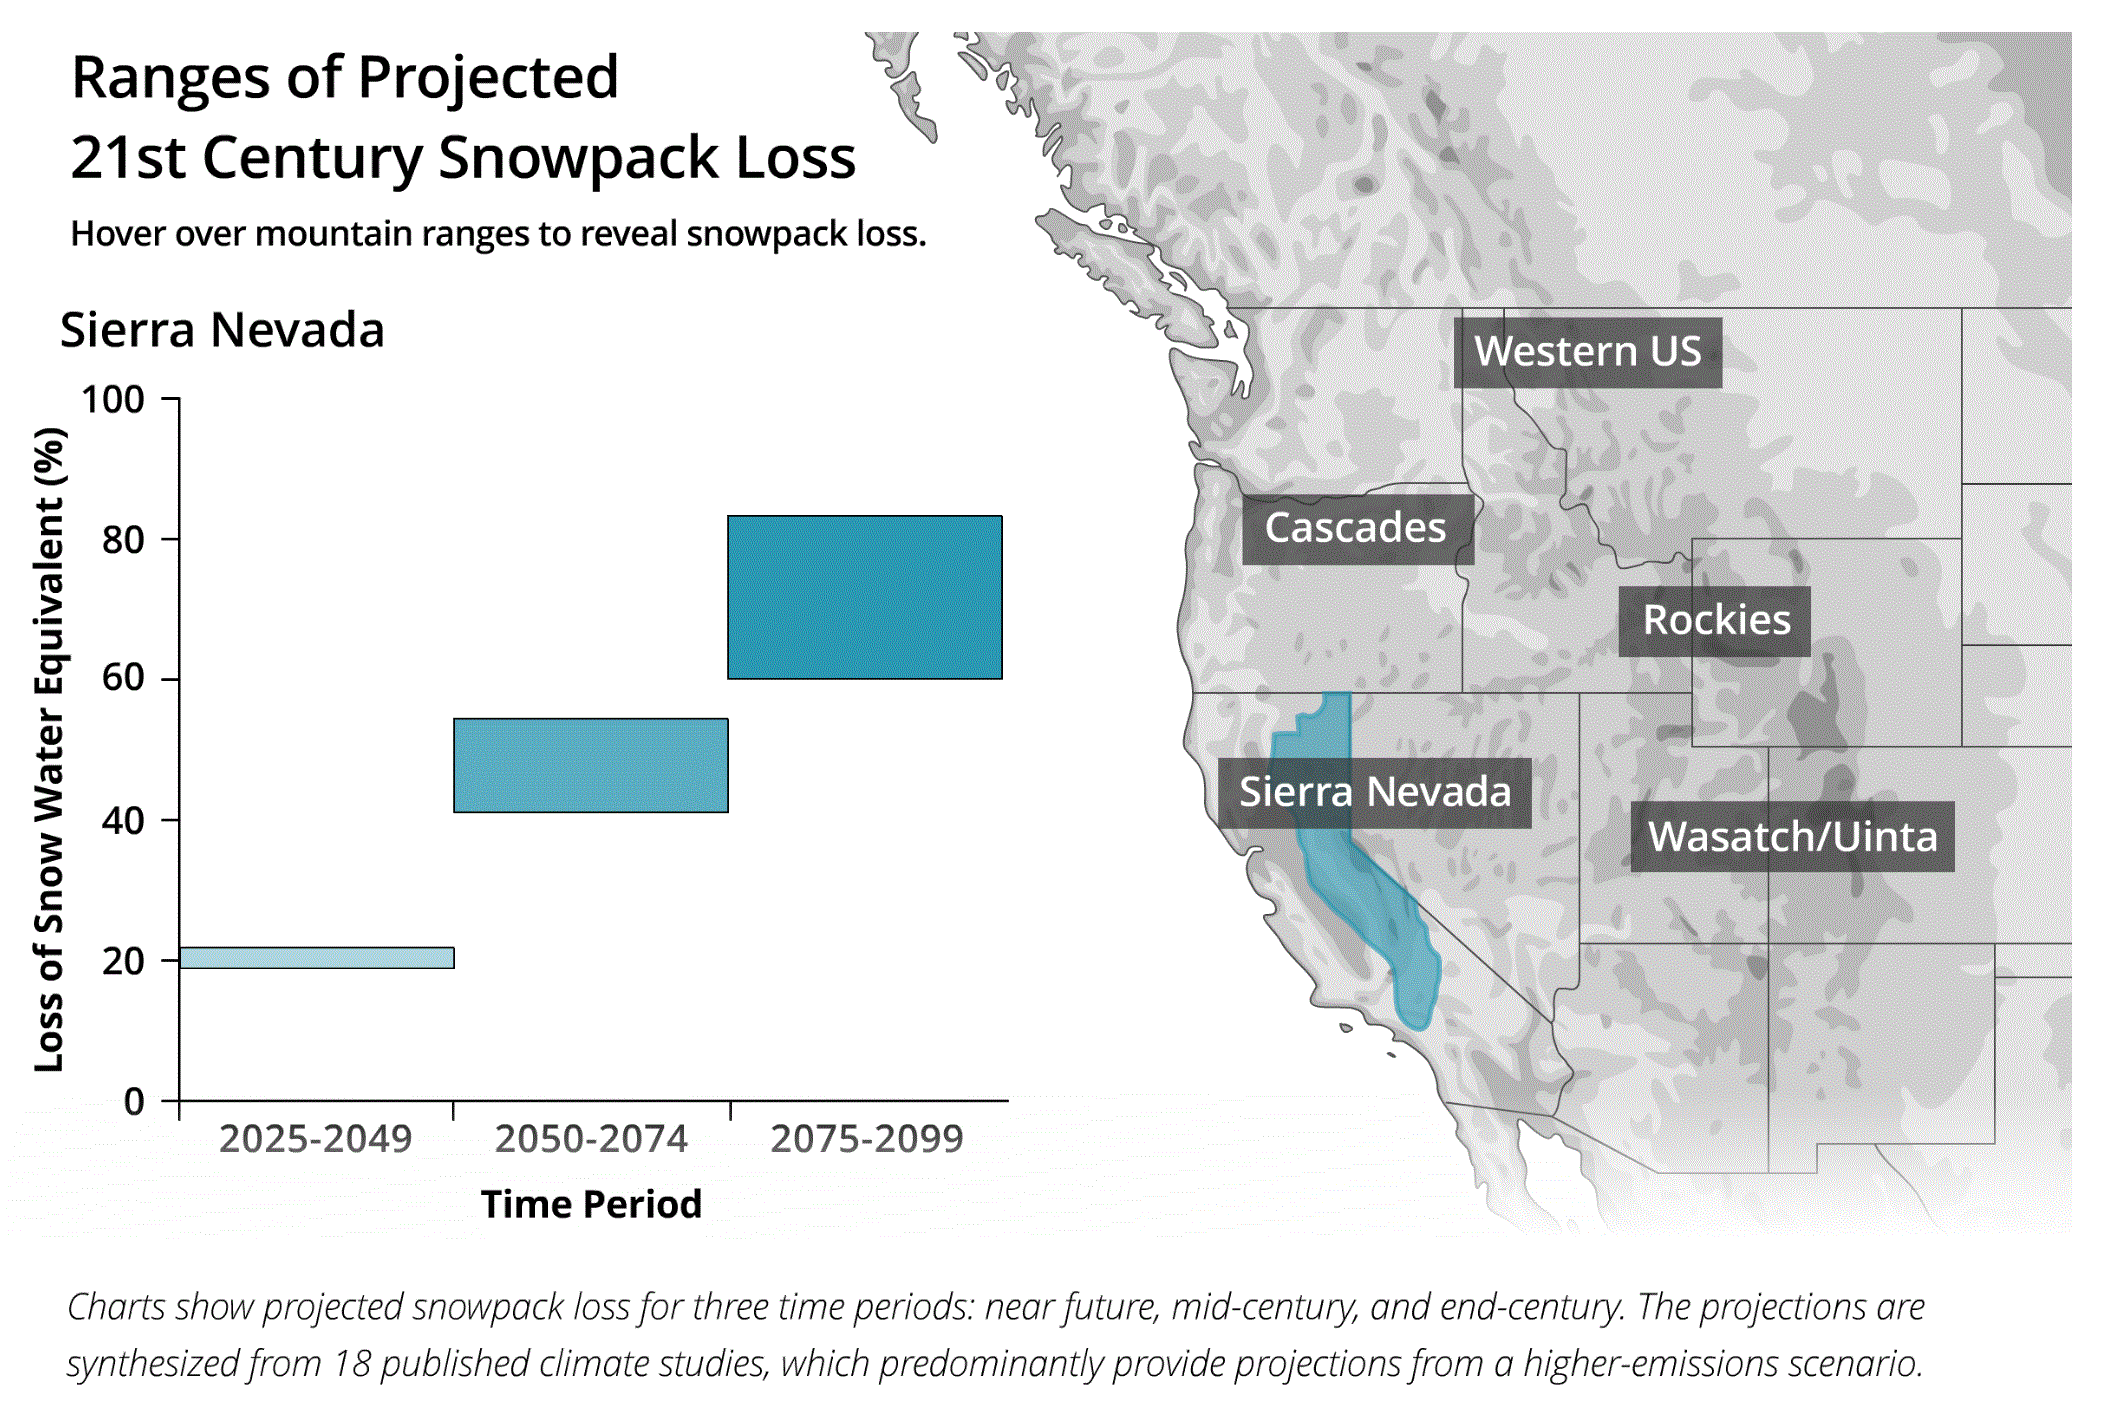 Ranges of projected 21st century snowpack loss in the U.S. West. California could experience episodic low-to-no snow as early as the late 2040s and persistent low-to-no snow in the 2060s, according to one high-resolution climate projection. For other parts of the western U.S., persistent low-to-no snow emerges in the 2070s. Graphic: Erica Siirila-Woodburn and Alan Rhoades, 2021 / Nature Reviews Earth and Environment